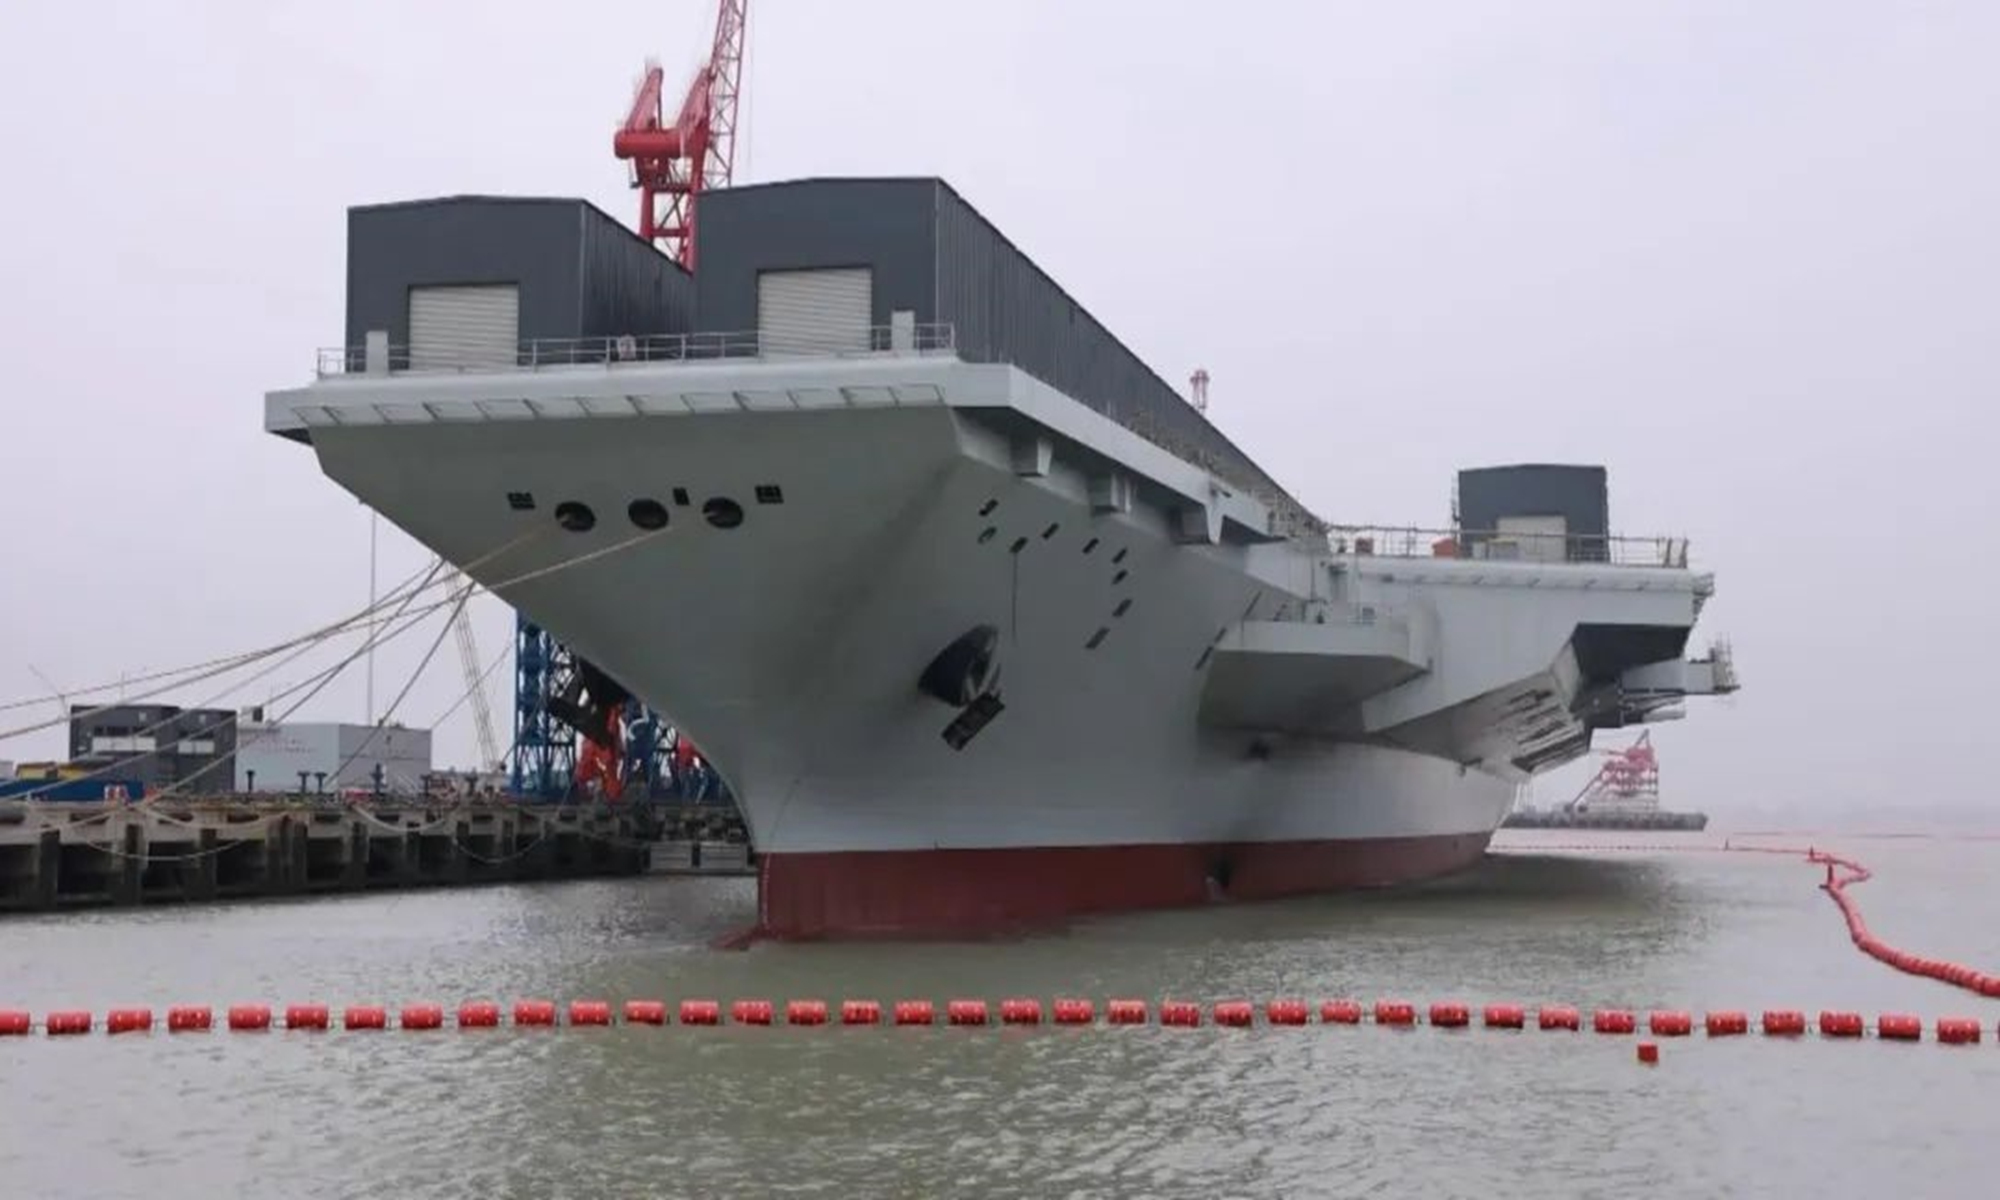 The Fujian, the third aircraft carrier of China, undergoes outfitting and mooring trials in Shanghai in early 2023. Photo: Screenshot from China Central Television